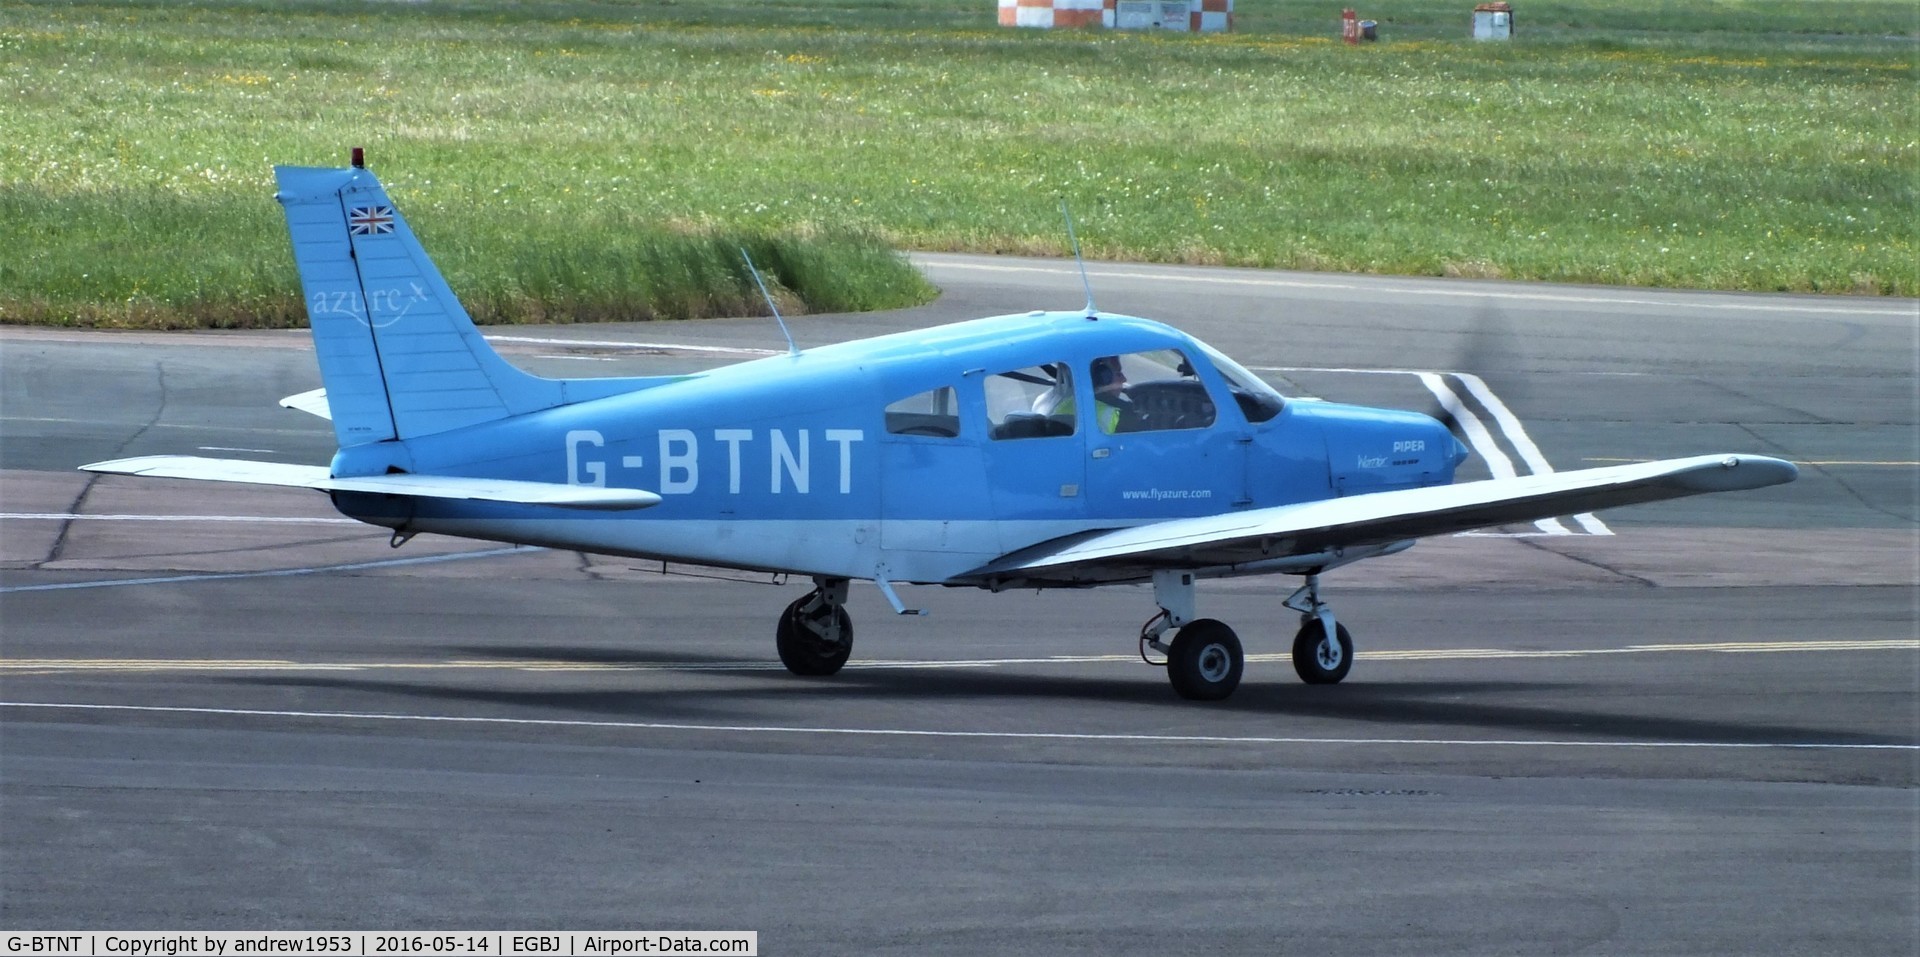 G-BTNT, 1976 Piper PA-28-151 Cherokee Warrior C/N 28-7615401, G-BTNT at Gloucestershire Airport.